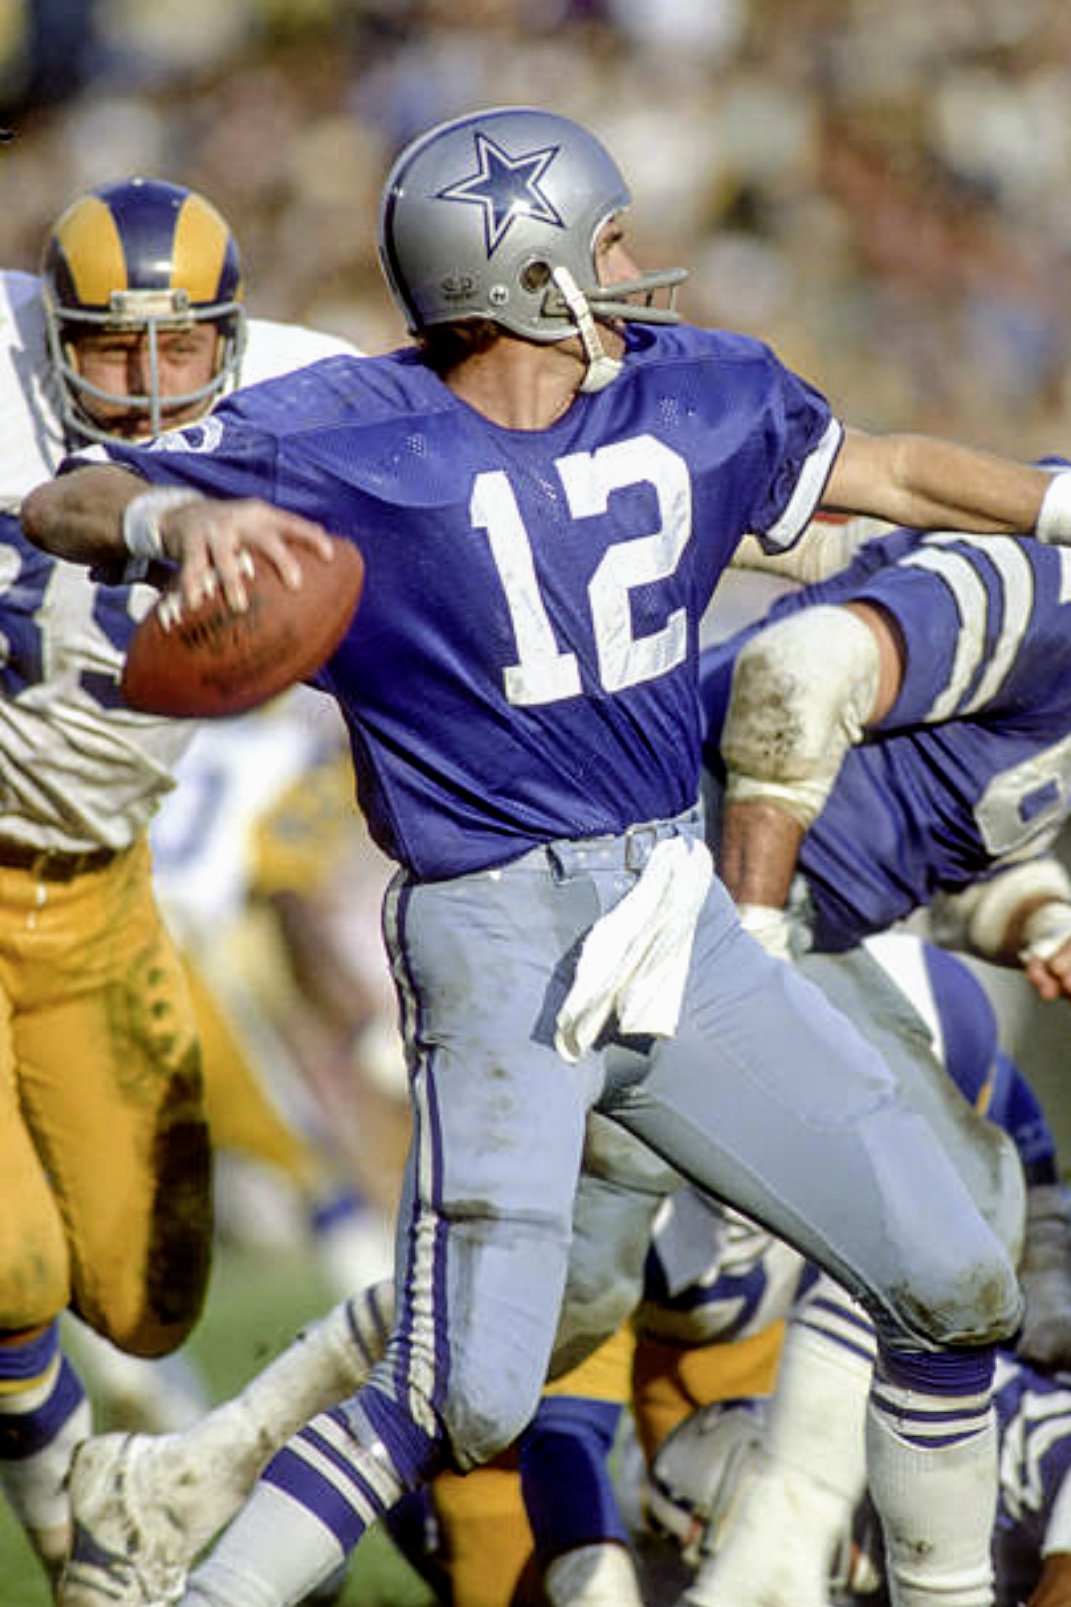 Kevin Gallagher on X: 'Staubach. The 1978 NFC Championship. 44 years ago  today in Los Angeles. No blue jersey curse on this day for the #Cowboys,  just a stud in a gorgeous